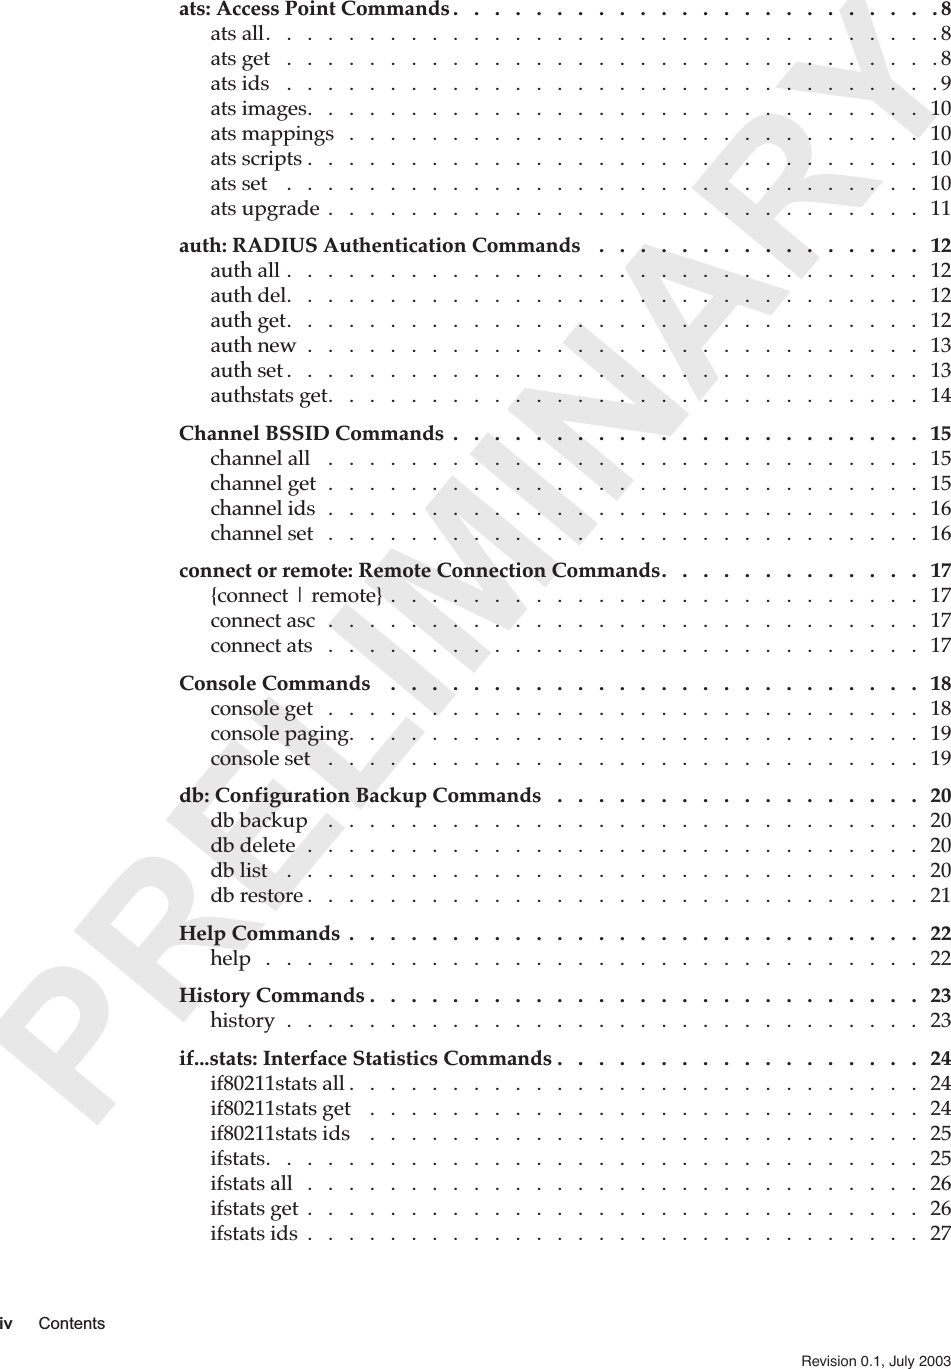  PRELIMINARY iv Contents Revision 0.1, July 2003   ats: Access Point Commands .   .   .   .   .   .   .   .   .   .   .   .   .   .   .   .   .   .   .   .   .   .   .   . 8 ats all.   .   .   .   .   .   .   .   .   .   .   .   .   .   .   .   .   .   .   .   .   .   .   .   .   .   .   .   .   .   .   .   . 8ats get   .   .   .   .   .   .   .   .   .   .   .   .   .   .   .   .   .   .   .   .   .   .   .   .   .   .   .   .   .   .   .   . 8ats ids   .   .   .   .   .   .   .   .   .   .   .   .   .   .   .   .   .   .   .   .   .   .   .   .   .   .   .   .   .   .   .   . 9ats images.   .   .   .   .   .   .   .   .   .   .   .   .   .   .   .   .   .   .   .   .   .   .   .   .   .   .   .   .   .   10ats mappings   .   .   .   .   .   .   .   .   .   .   .   .   .   .   .   .   .   .   .   .   .   .   .   .   .   .   .   .   10ats scripts .   .   .   .   .   .   .   .   .   .   .   .   .   .   .   .   .   .   .   .   .   .   .   .   .   .   .   .   .   .   10ats set    .   .   .   .   .   .   .   .   .   .   .   .   .   .   .   .   .   .   .   .   .   .   .   .   .   .   .   .   .   .   .   10ats upgrade  .   .   .   .   .   .   .   .   .   .   .   .   .   .   .   .   .   .   .   .   .   .   .   .   .   .   .   .   .   11 auth: RADIUS Authentication Commands    .   .   .   .   .   .   .   .   .   .   .   .   .   .   .   .   12 auth all .   .   .   .   .   .   .   .   .   .   .   .   .   .   .   .   .   .   .   .   .   .   .   .   .   .   .   .   .   .   .   12auth del.   .   .   .   .   .   .   .   .   .   .   .   .   .   .   .   .   .   .   .   .   .   .   .   .   .   .   .   .   .   .   12auth get.   .   .   .   .   .   .   .   .   .   .   .   .   .   .   .   .   .   .   .   .   .   .   .   .   .   .   .   .   .   .   12auth new  .   .   .   .   .   .   .   .   .   .   .   .   .   .   .   .   .   .   .   .   .   .   .   .   .   .   .   .   .   .   13auth set .   .   .   .   .   .   .   .   .   .   .   .   .   .   .   .   .   .   .   .   .   .   .   .   .   .   .   .   .   .   .   13authstats get.   .   .   .   .   .   .   .   .   .   .   .   .   .   .   .   .   .   .   .   .   .   .   .   .   .   .   .   .   14 Channel BSSID Commands  .   .   .   .   .   .   .   .   .   .   .   .   .   .   .   .   .   .   .   .   .   .   .   15 channel all   .   .   .   .   .   .   .   .   .   .   .   .   .   .   .   .   .   .   .   .   .   .   .   .   .   .   .   .   .   15channel get  .   .   .   .   .   .   .   .   .   .   .   .   .   .   .   .   .   .   .   .   .   .   .   .   .   .   .   .   .   15channel ids  .   .   .   .   .   .   .   .   .   .   .   .   .   .   .   .   .   .   .   .   .   .   .   .   .   .   .   .   .   16channel set   .   .   .   .   .   .   .   .   .   .   .   .   .   .   .   .   .   .   .   .   .   .   .   .   .   .   .   .   .   16 connect or remote: Remote Connection Commands.   .   .   .   .   .   .   .   .   .   .   .   .   17 {connect | remote} .   .   .   .   .   .   .   .   .   .   .   .   .   .   .   .   .   .   .   .   .   .   .   .   .   .   17connect asc  .   .   .   .   .   .   .   .   .   .   .   .   .   .   .   .   .   .   .   .   .   .   .   .   .   .   .   .   .   17connect ats   .   .   .   .   .   .   .   .   .   .   .   .   .   .   .   .   .   .   .   .   .   .   .   .   .   .   .   .   .   17 Console Commands    .   .   .   .   .   .   .   .   .   .   .   .   .   .   .   .   .   .   .   .   .   .   .   .   .   .   18 console get   .   .   .   .   .   .   .   .   .   .   .   .   .   .   .   .   .   .   .   .   .   .   .   .   .   .   .   .   .   18console paging.   .   .   .   .   .   .   .   .   .   .   .   .   .   .   .   .   .   .   .   .   .   .   .   .   .   .   .   19console set   .   .   .   .   .   .   .   .   .   .   .   .   .   .   .   .   .   .   .   .   .   .   .   .   .   .   .   .   .   19 db: Configuration Backup Commands   .   .   .   .   .   .   .   .   .   .   .   .   .   .   .   .   .   .   20 db backup    .   .   .   .   .   .   .   .   .   .   .   .   .   .   .   .   .   .   .   .   .   .   .   .   .   .   .   .   .   20db delete  .   .   .   .   .   .   .   .   .   .   .   .   .   .   .   .   .   .   .   .   .   .   .   .   .   .   .   .   .   .   20db list    .   .   .   .   .   .   .   .   .   .   .   .   .   .   .   .   .   .   .   .   .   .   .   .   .   .   .   .   .   .   .   20db restore .   .   .   .   .   .   .   .   .   .   .   .   .   .   .   .   .   .   .   .   .   .   .   .   .   .   .   .   .   .   21 Help Commands  .   .   .   .   .   .   .   .   .   .   .   .   .   .   .   .   .   .   .   .   .   .   .   .   .   .   .   .   22 help   .   .   .   .   .   .   .   .   .   .   .   .   .   .   .   .   .   .   .   .   .   .   .   .   .   .   .   .   .   .   .   .   22 History Commands .   .   .   .   .   .   .   .   .   .   .   .   .   .   .   .   .   .   .   .   .   .   .   .   .   .   .   23 history  .   .   .   .   .   .   .   .   .   .   .   .   .   .   .   .   .   .   .   .   .   .   .   .   .   .   .   .   .   .   .   23 if...stats: Interface Statistics Commands .   .   .   .   .   .   .   .   .   .   .   .   .   .   .   .   .   .   24 if80211stats all .   .   .   .   .   .   .   .   .   .   .   .   .   .   .   .   .   .   .   .   .   .   .   .   .   .   .   .   24if80211stats get    .   .   .   .   .   .   .   .   .   .   .   .   .   .   .   .   .   .   .   .   .   .   .   .   .   .   .   24if80211stats ids    .   .   .   .   .   .   .   .   .   .   .   .   .   .   .   .   .   .   .   .   .   .   .   .   .   .   .   25ifstats.   .   .   .   .   .   .   .   .   .   .   .   .   .   .   .   .   .   .   .   .   .   .   .   .   .   .   .   .   .   .   .   25ifstats all   .   .   .   .   .   .   .   .   .   .   .   .   .   .   .   .   .   .   .   .   .   .   .   .   .   .   .   .   .   .   26ifstats get  .   .   .   .   .   .   .   .   .   .   .   .   .   .   .   .   .   .   .   .   .   .   .   .   .   .   .   .   .   .   26ifstats ids  .   .   .   .   .   .   .   .   .   .   .   .   .   .   .   .   .   .   .   .   .   .   .   .   .   .   .   .   .   .   27